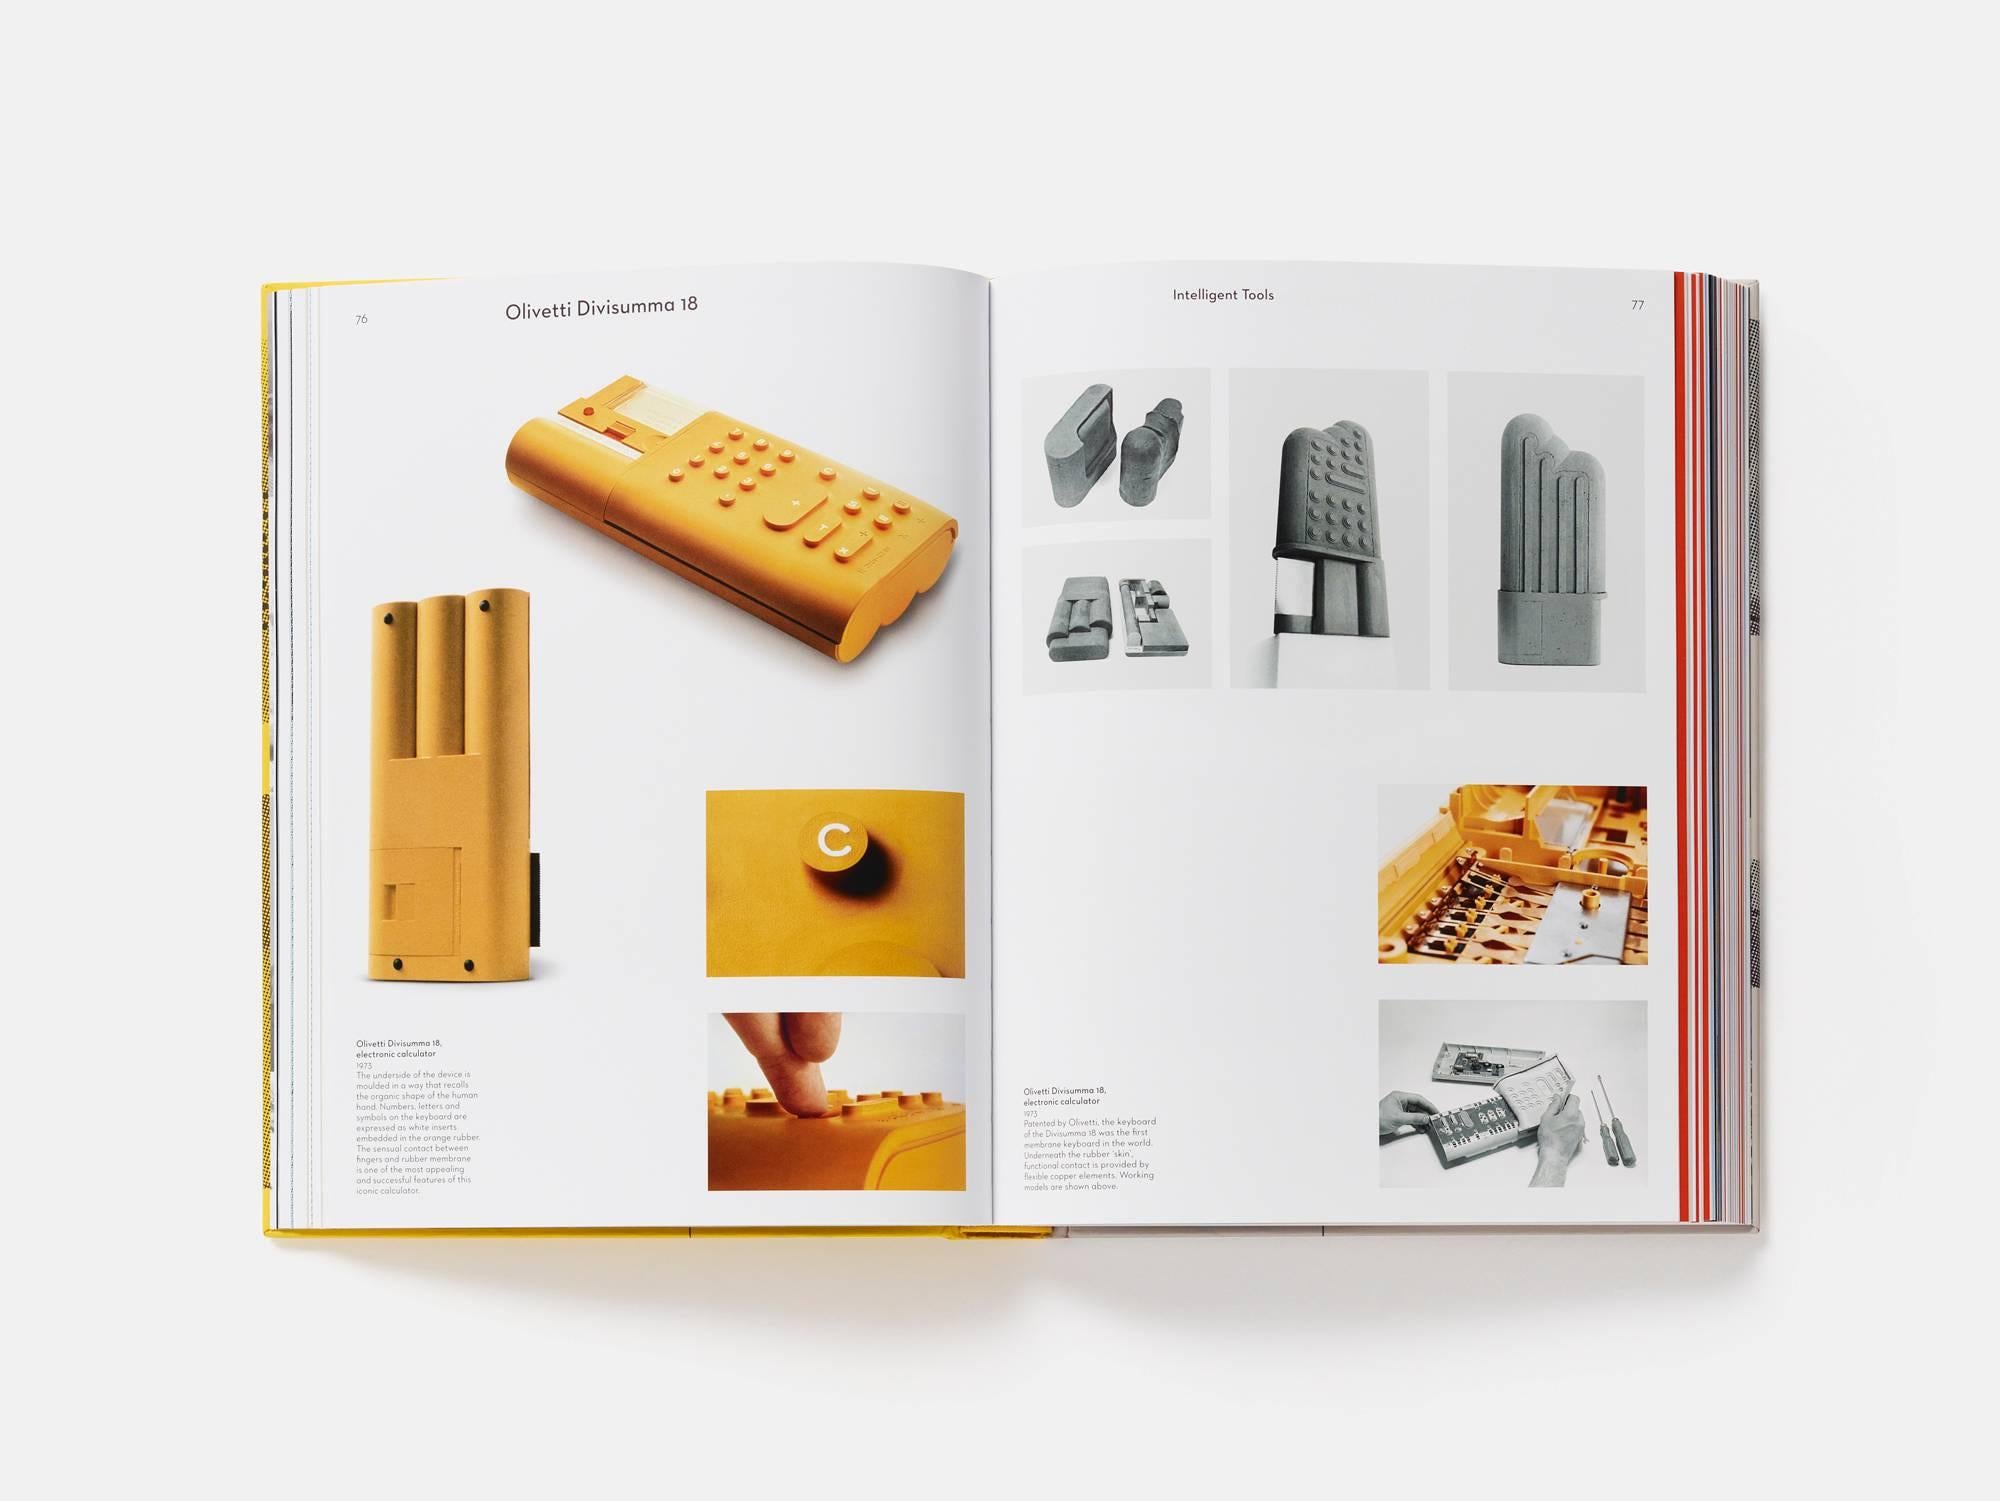 The first comprehensive monograph on Mario Bellini, one of Italy’s most versatile and influential designers. 

The book is richly illustrated with over 500 images, including sketches and photographs, from Mario Bellini’s archive, published for the